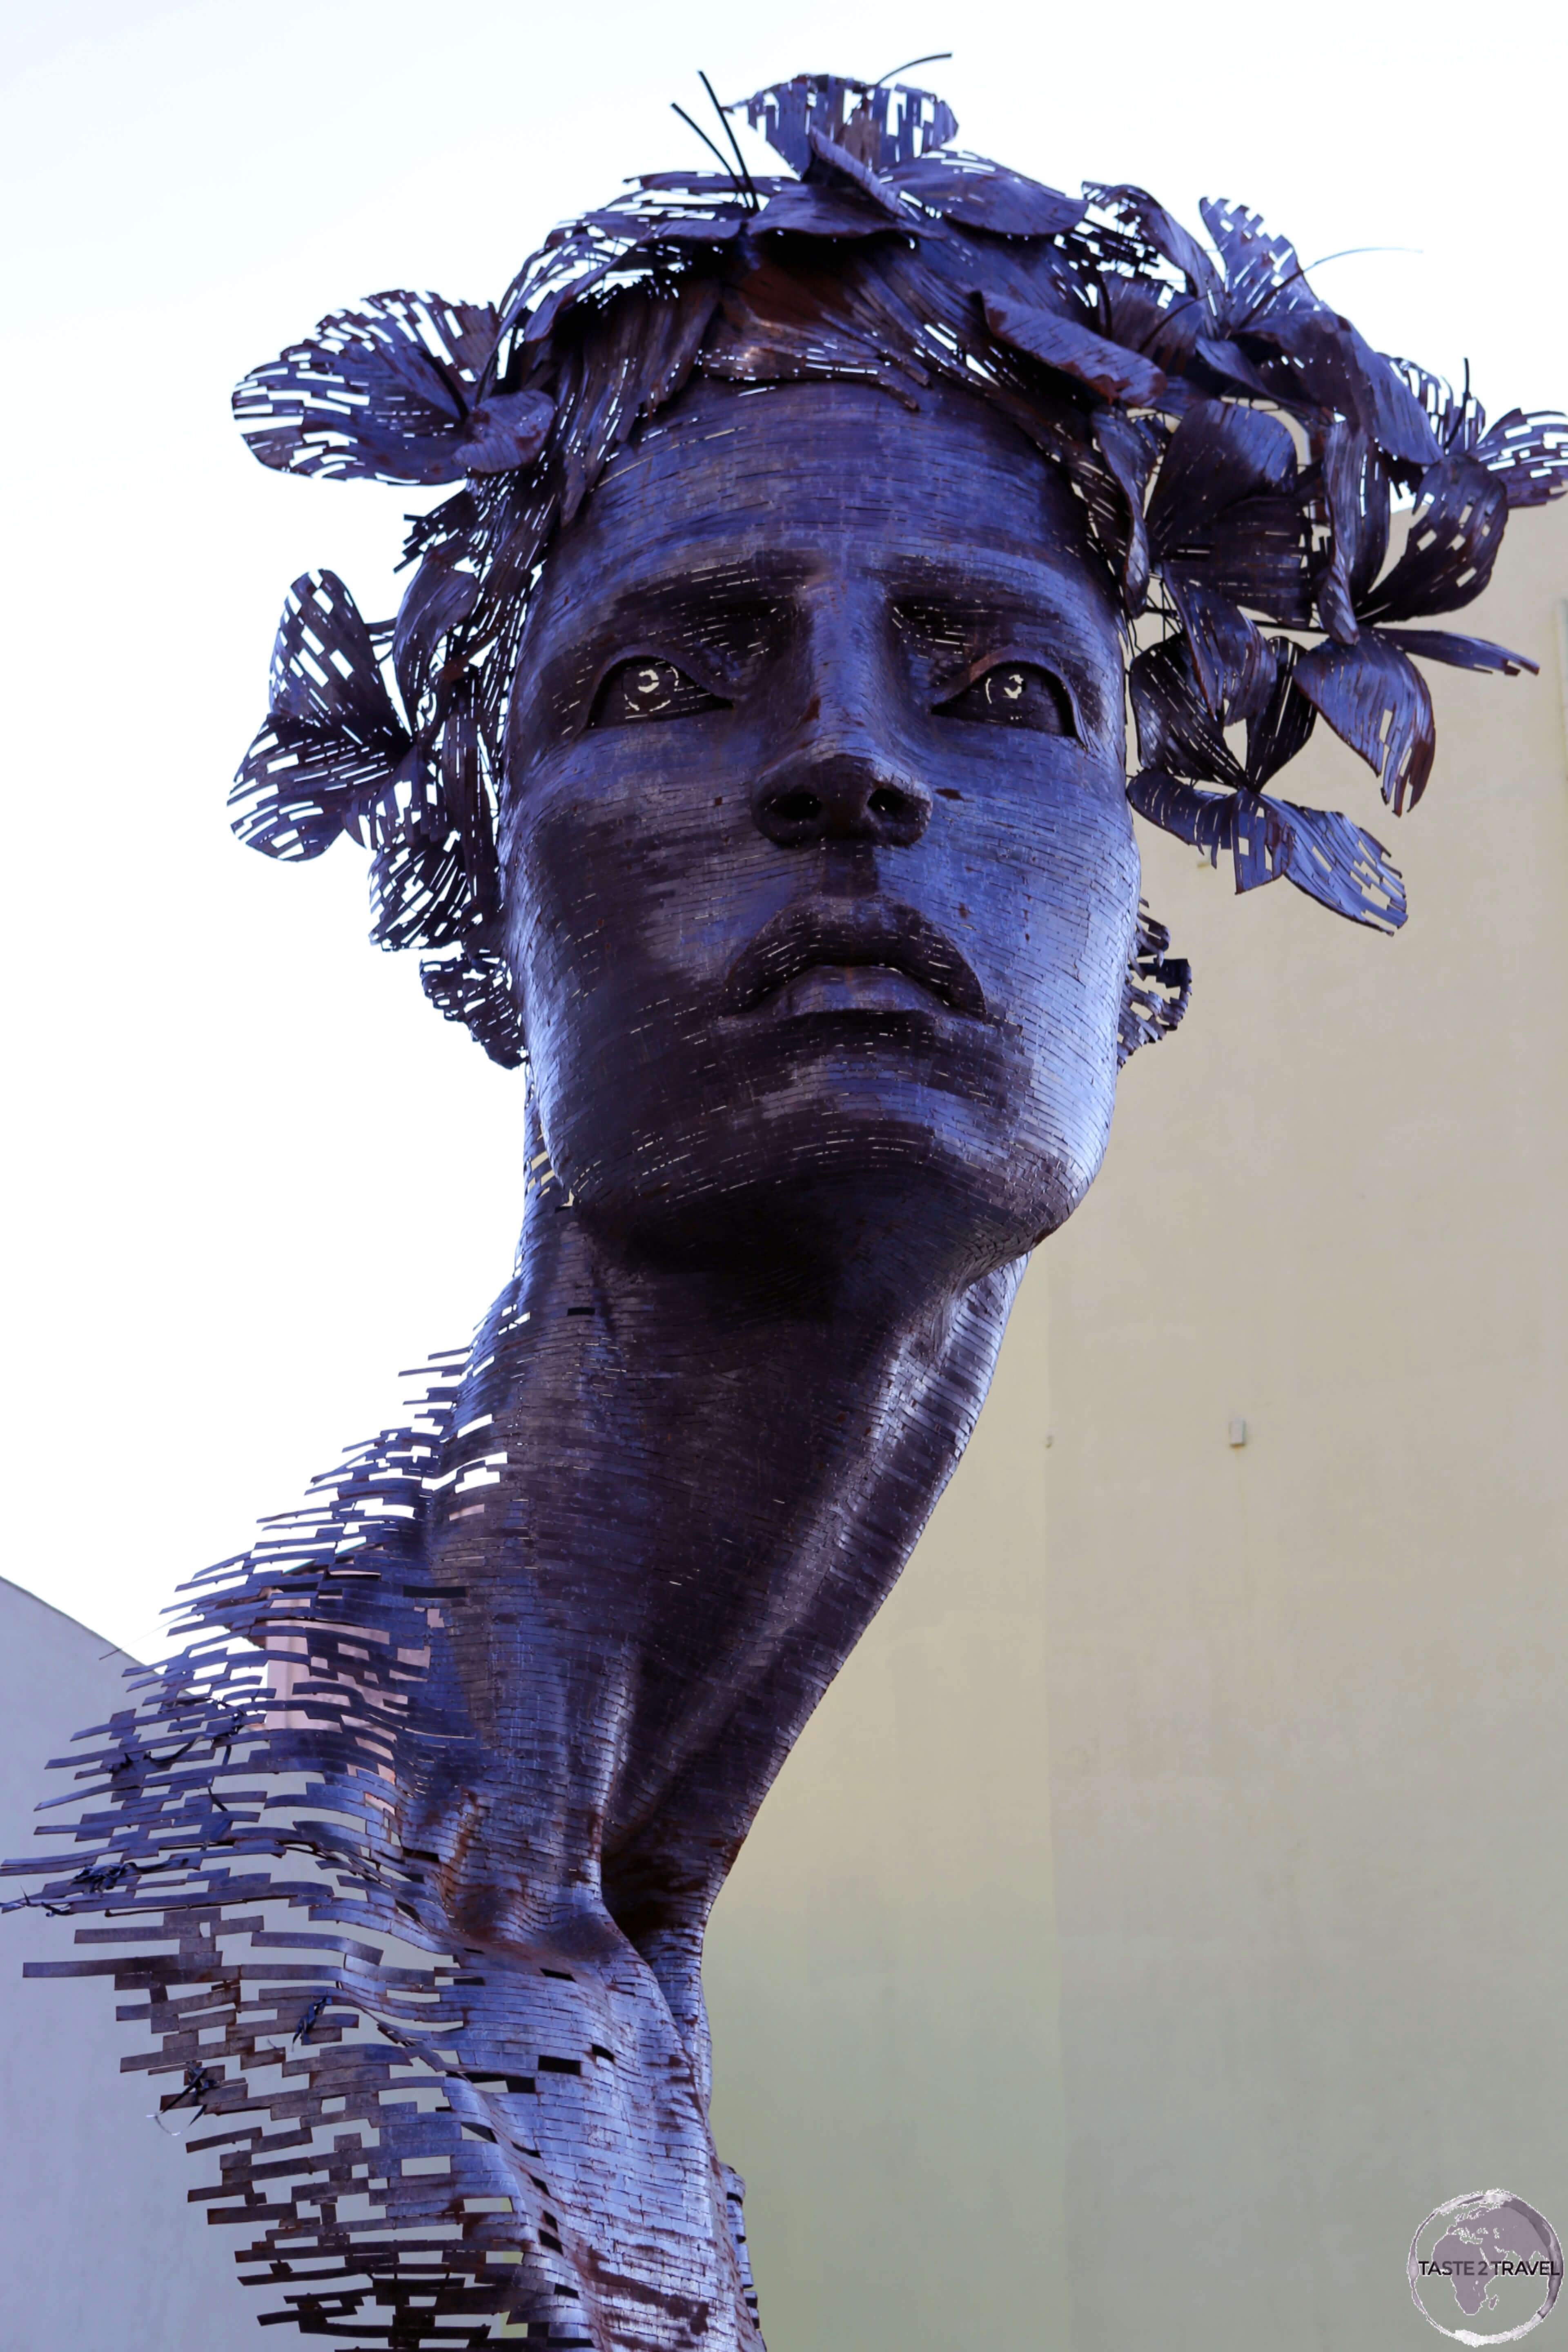 The sculpture, <i>Primavera</i>, was installed on the Malecón in 2015 as part of the 12th Biennale.